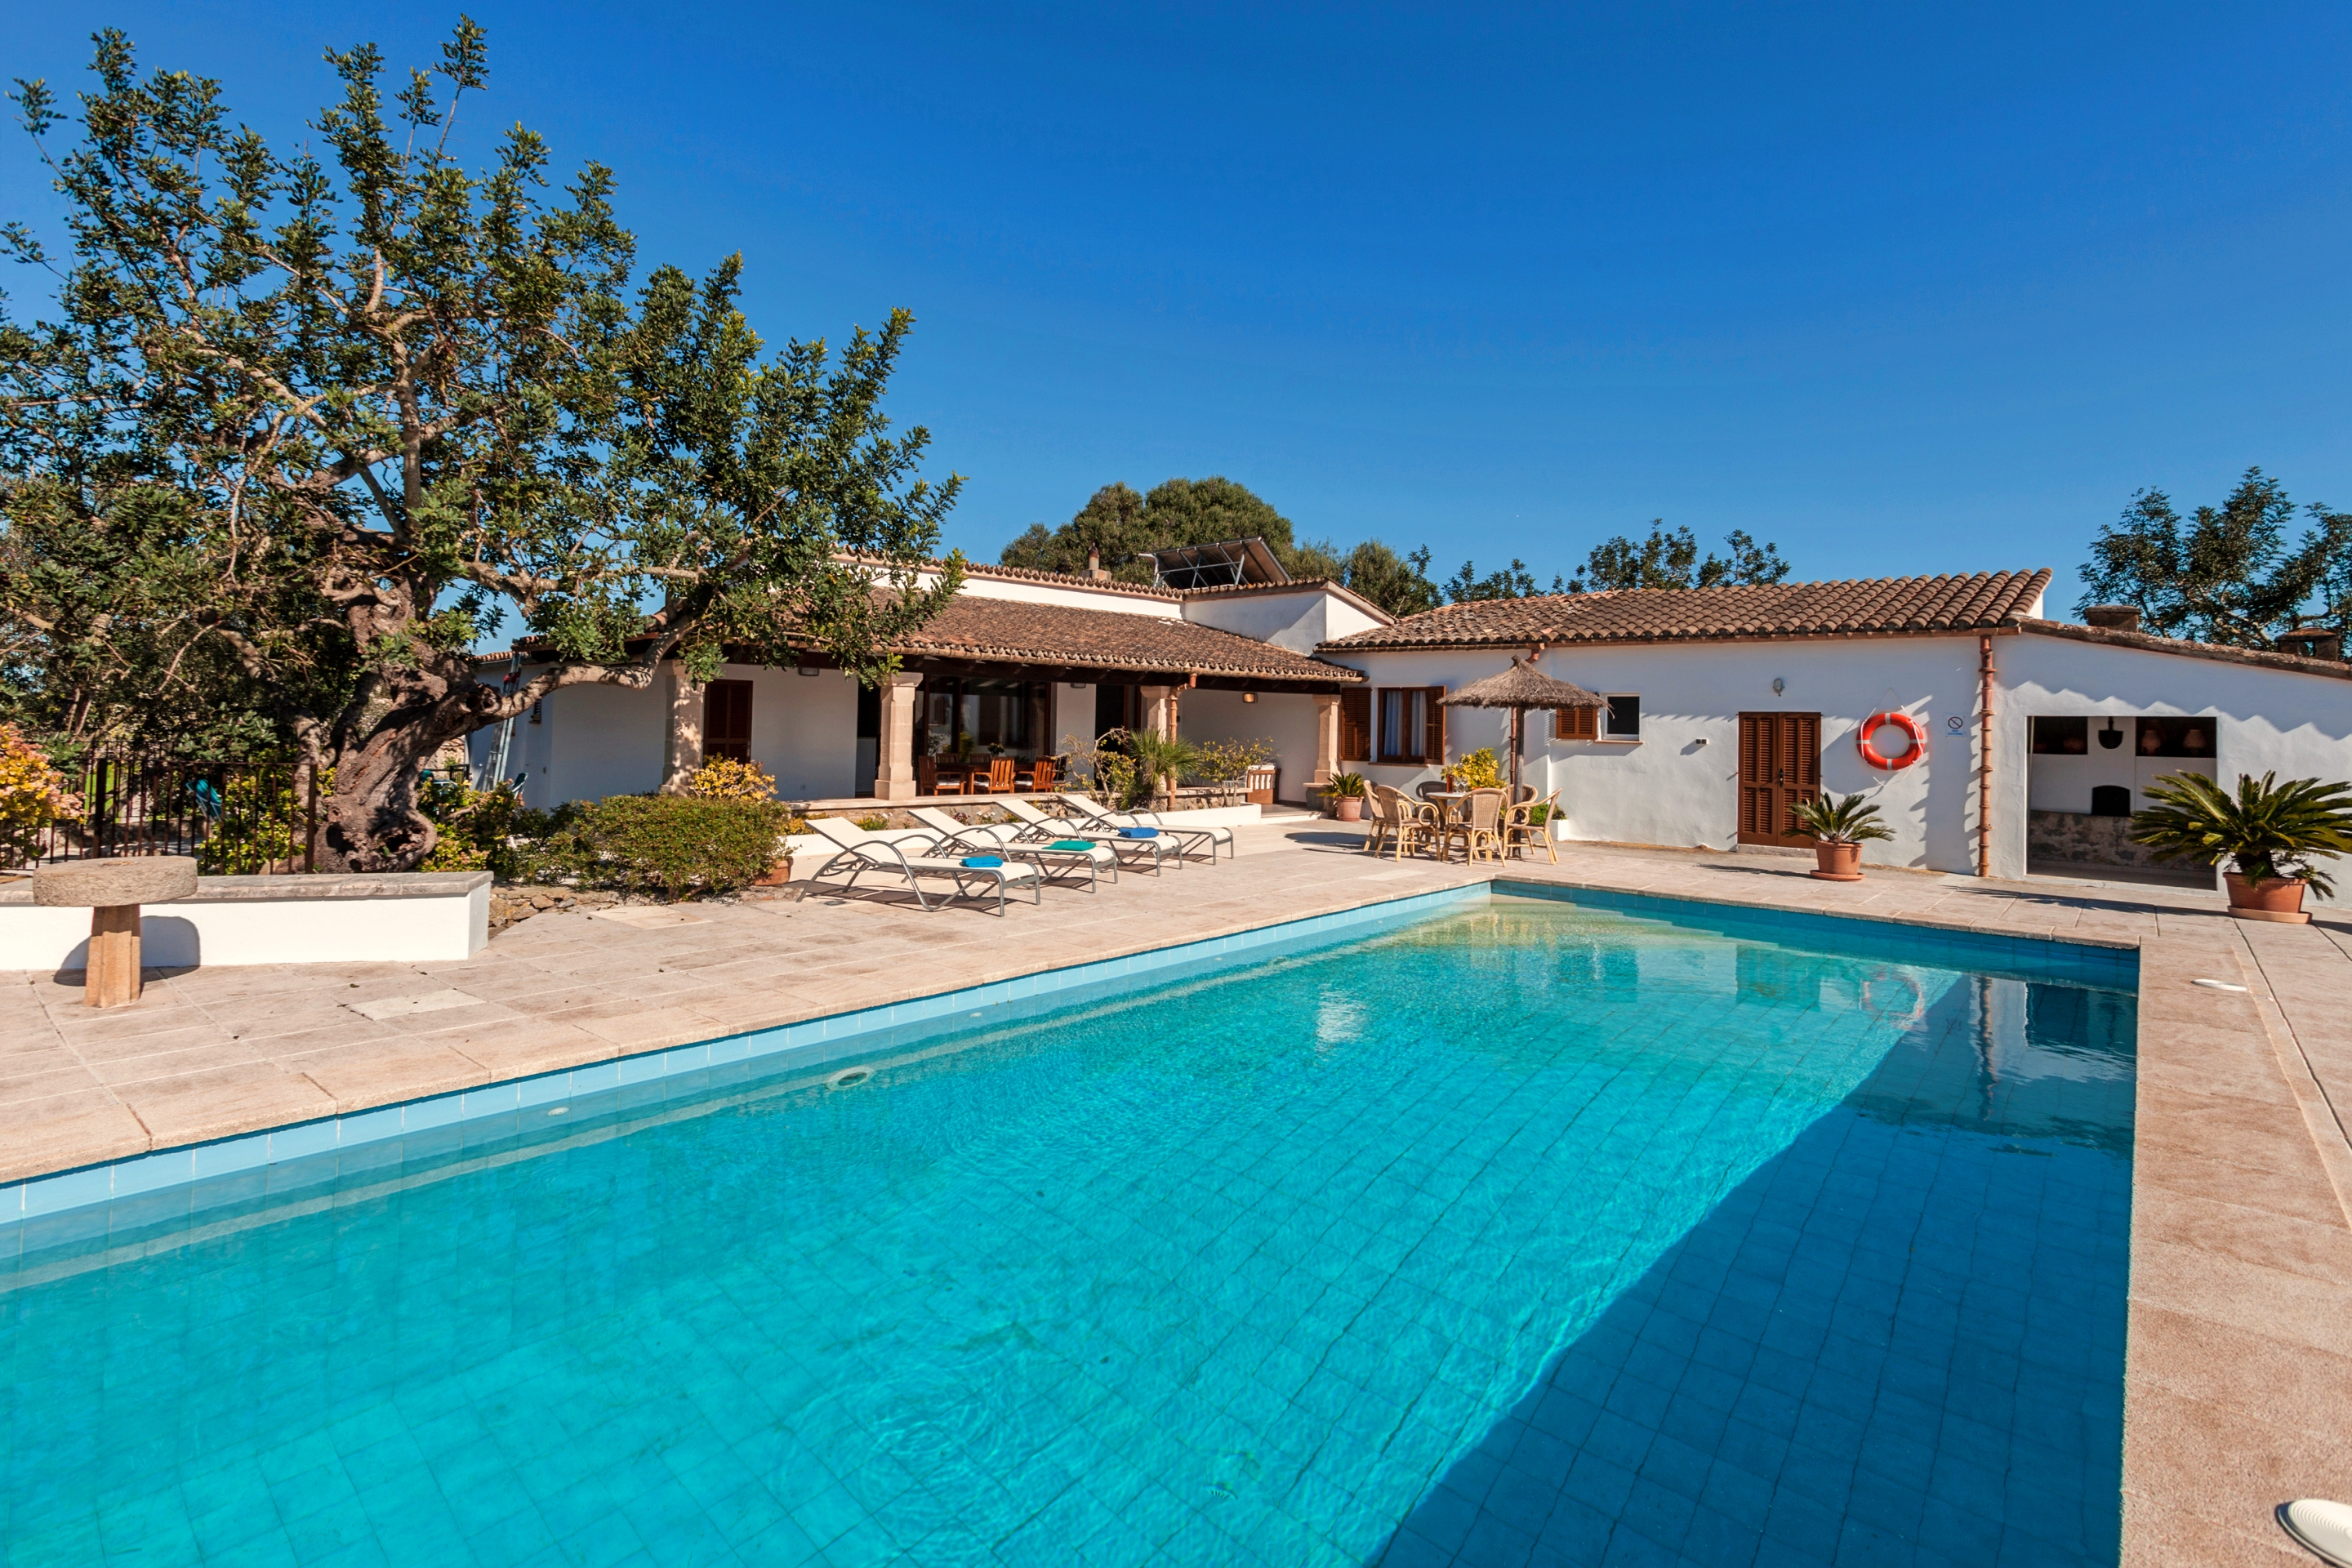 Traditional 3 bedroom holiday rental with pool Pollensa Mallorca